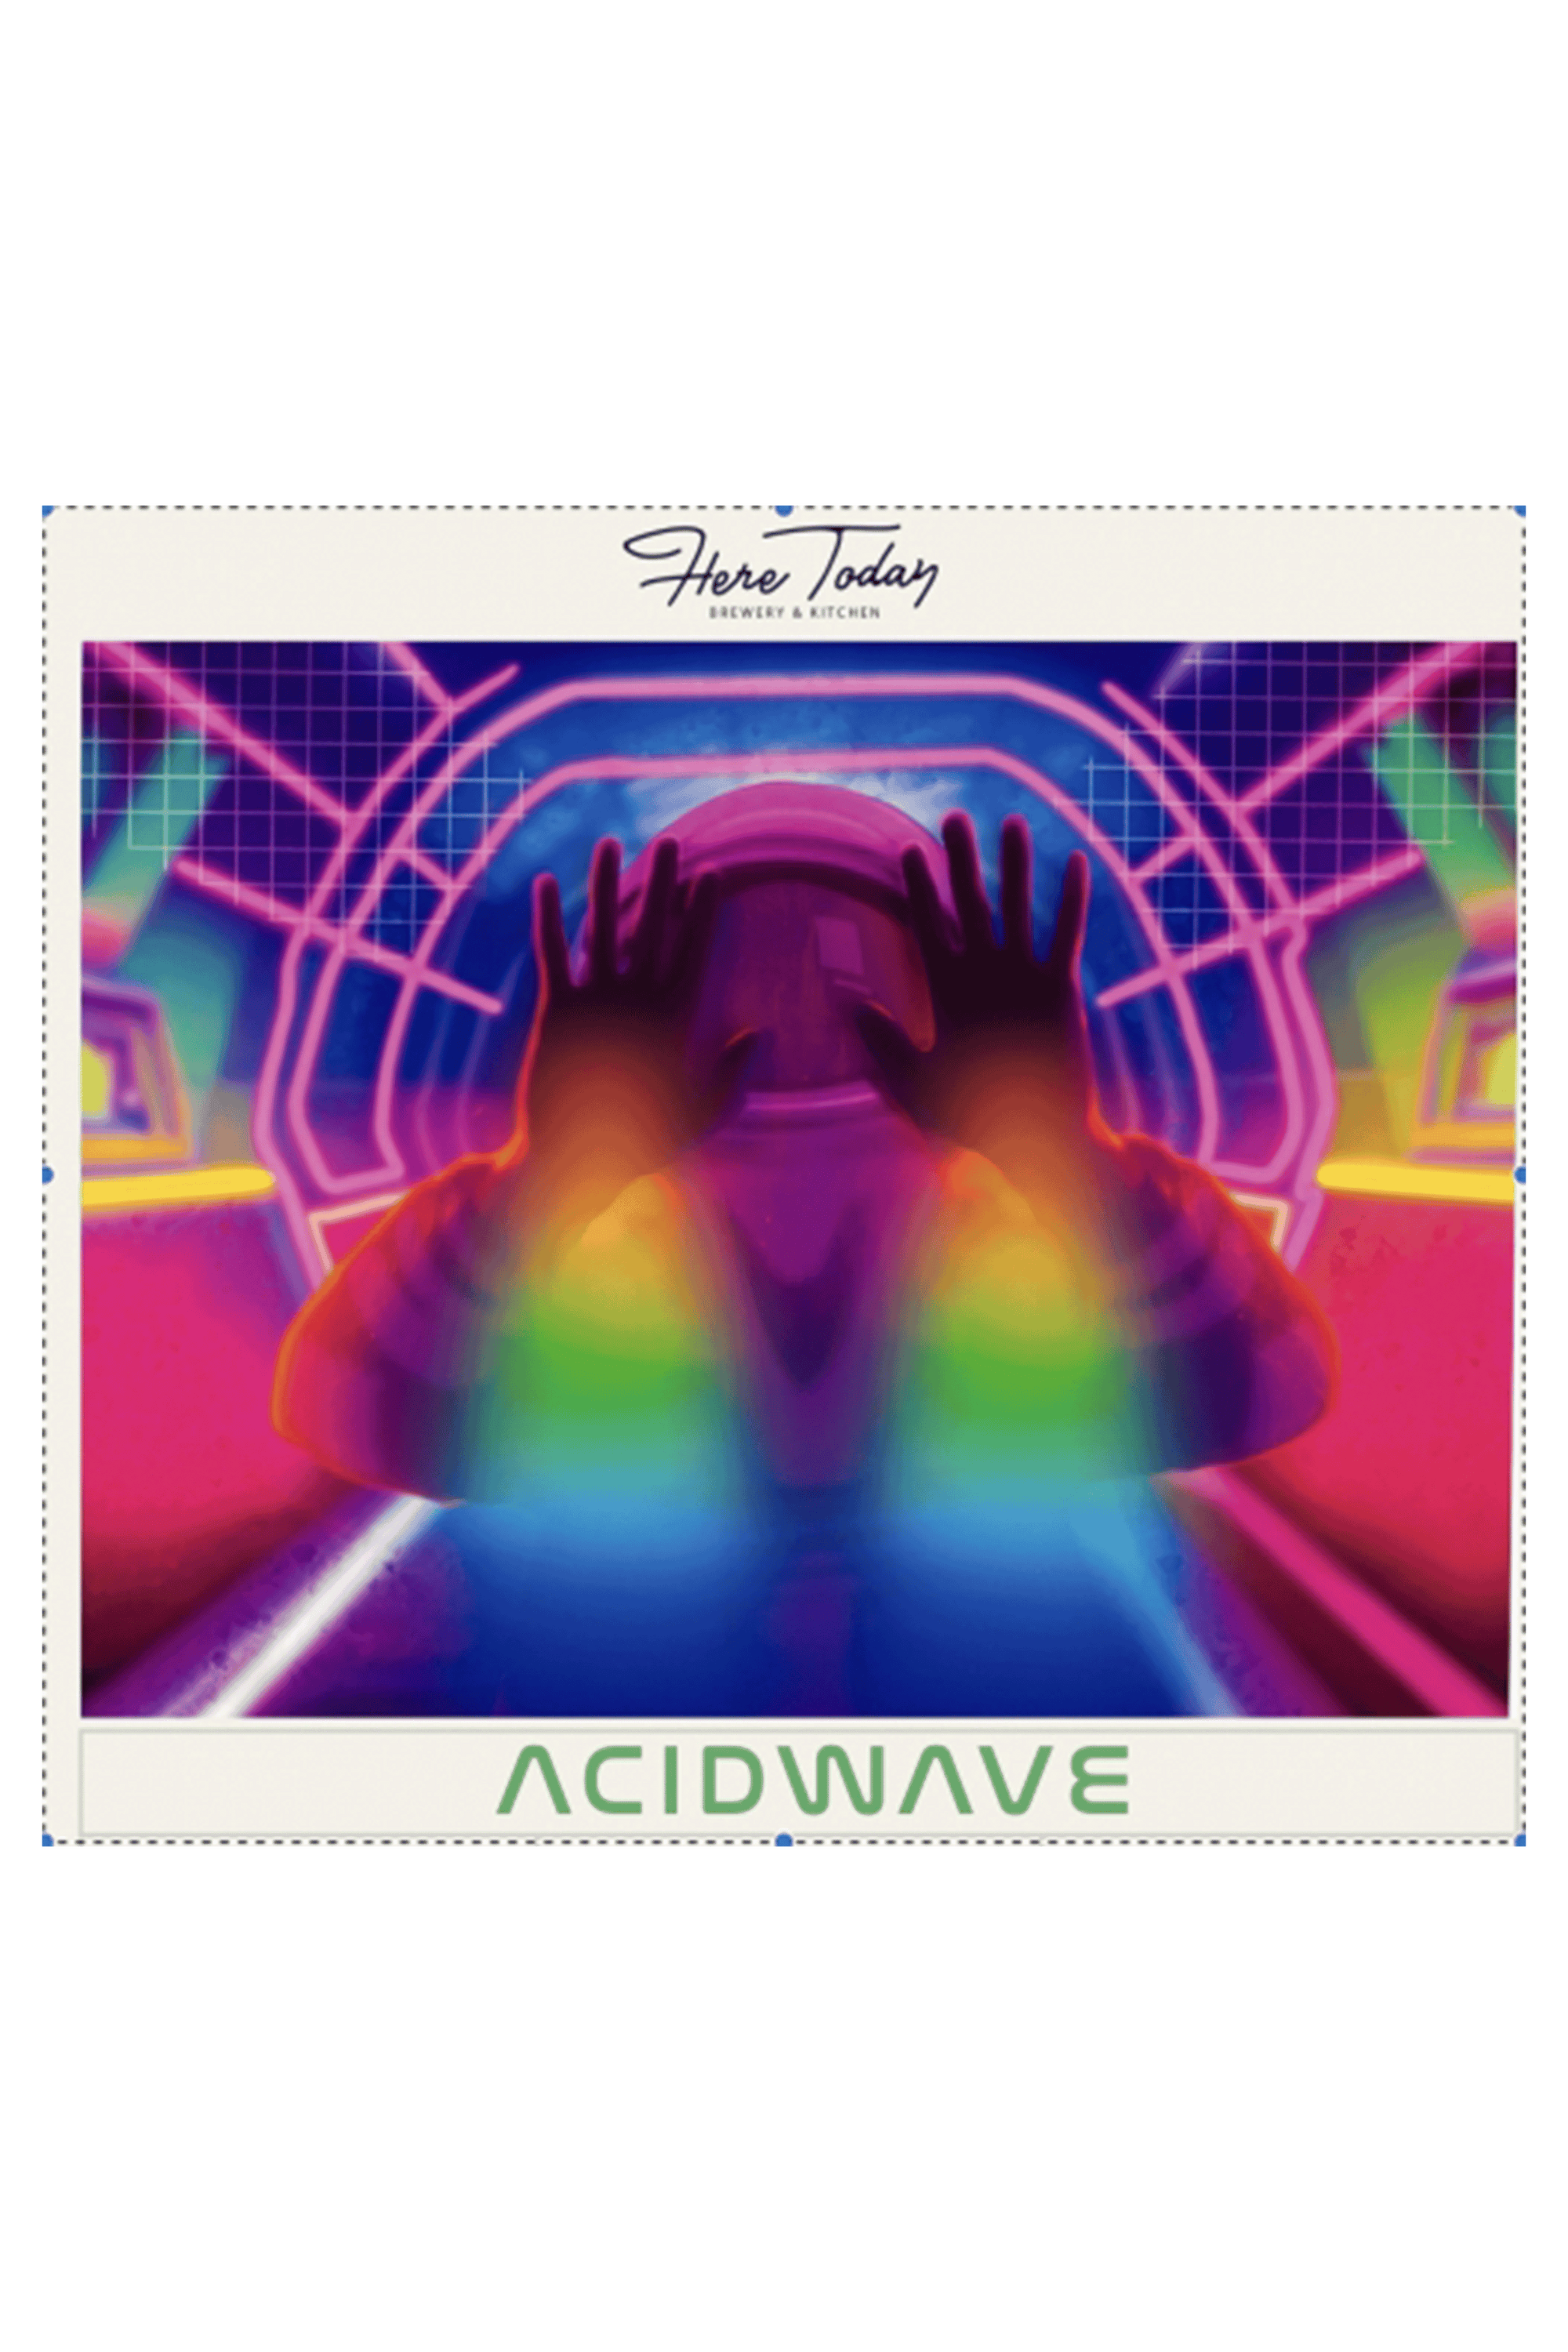 Here Today 'AcidWave' Prickly Pear Sour Ale